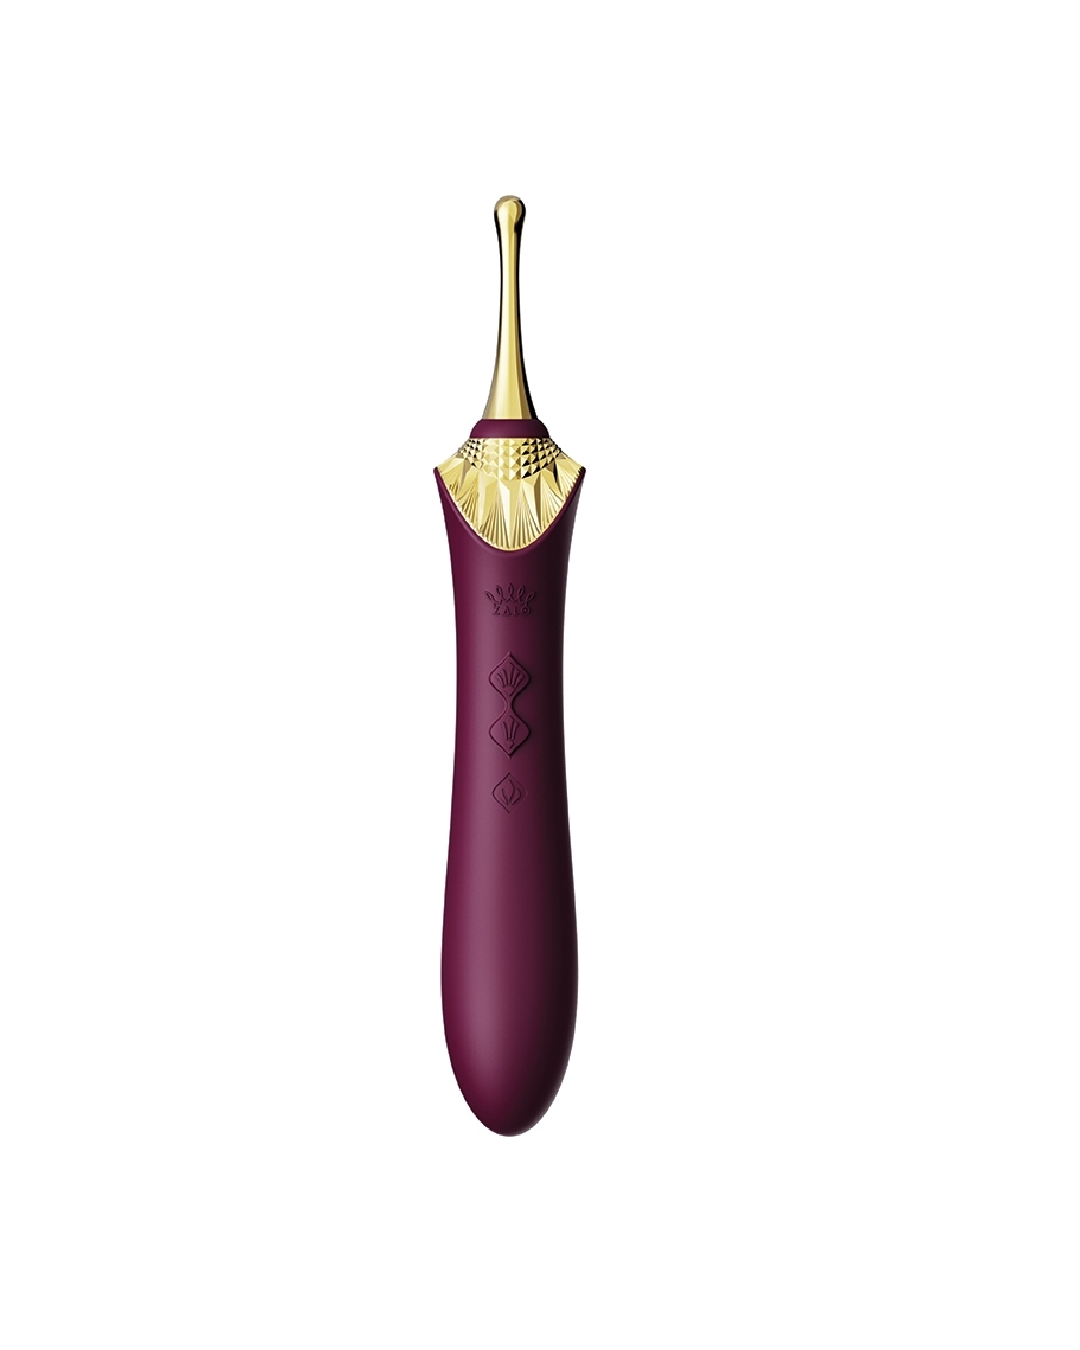 Zalo Bess 2.0 Clitoral Heating Vibrator with Attachments  - Purple with gold accents 